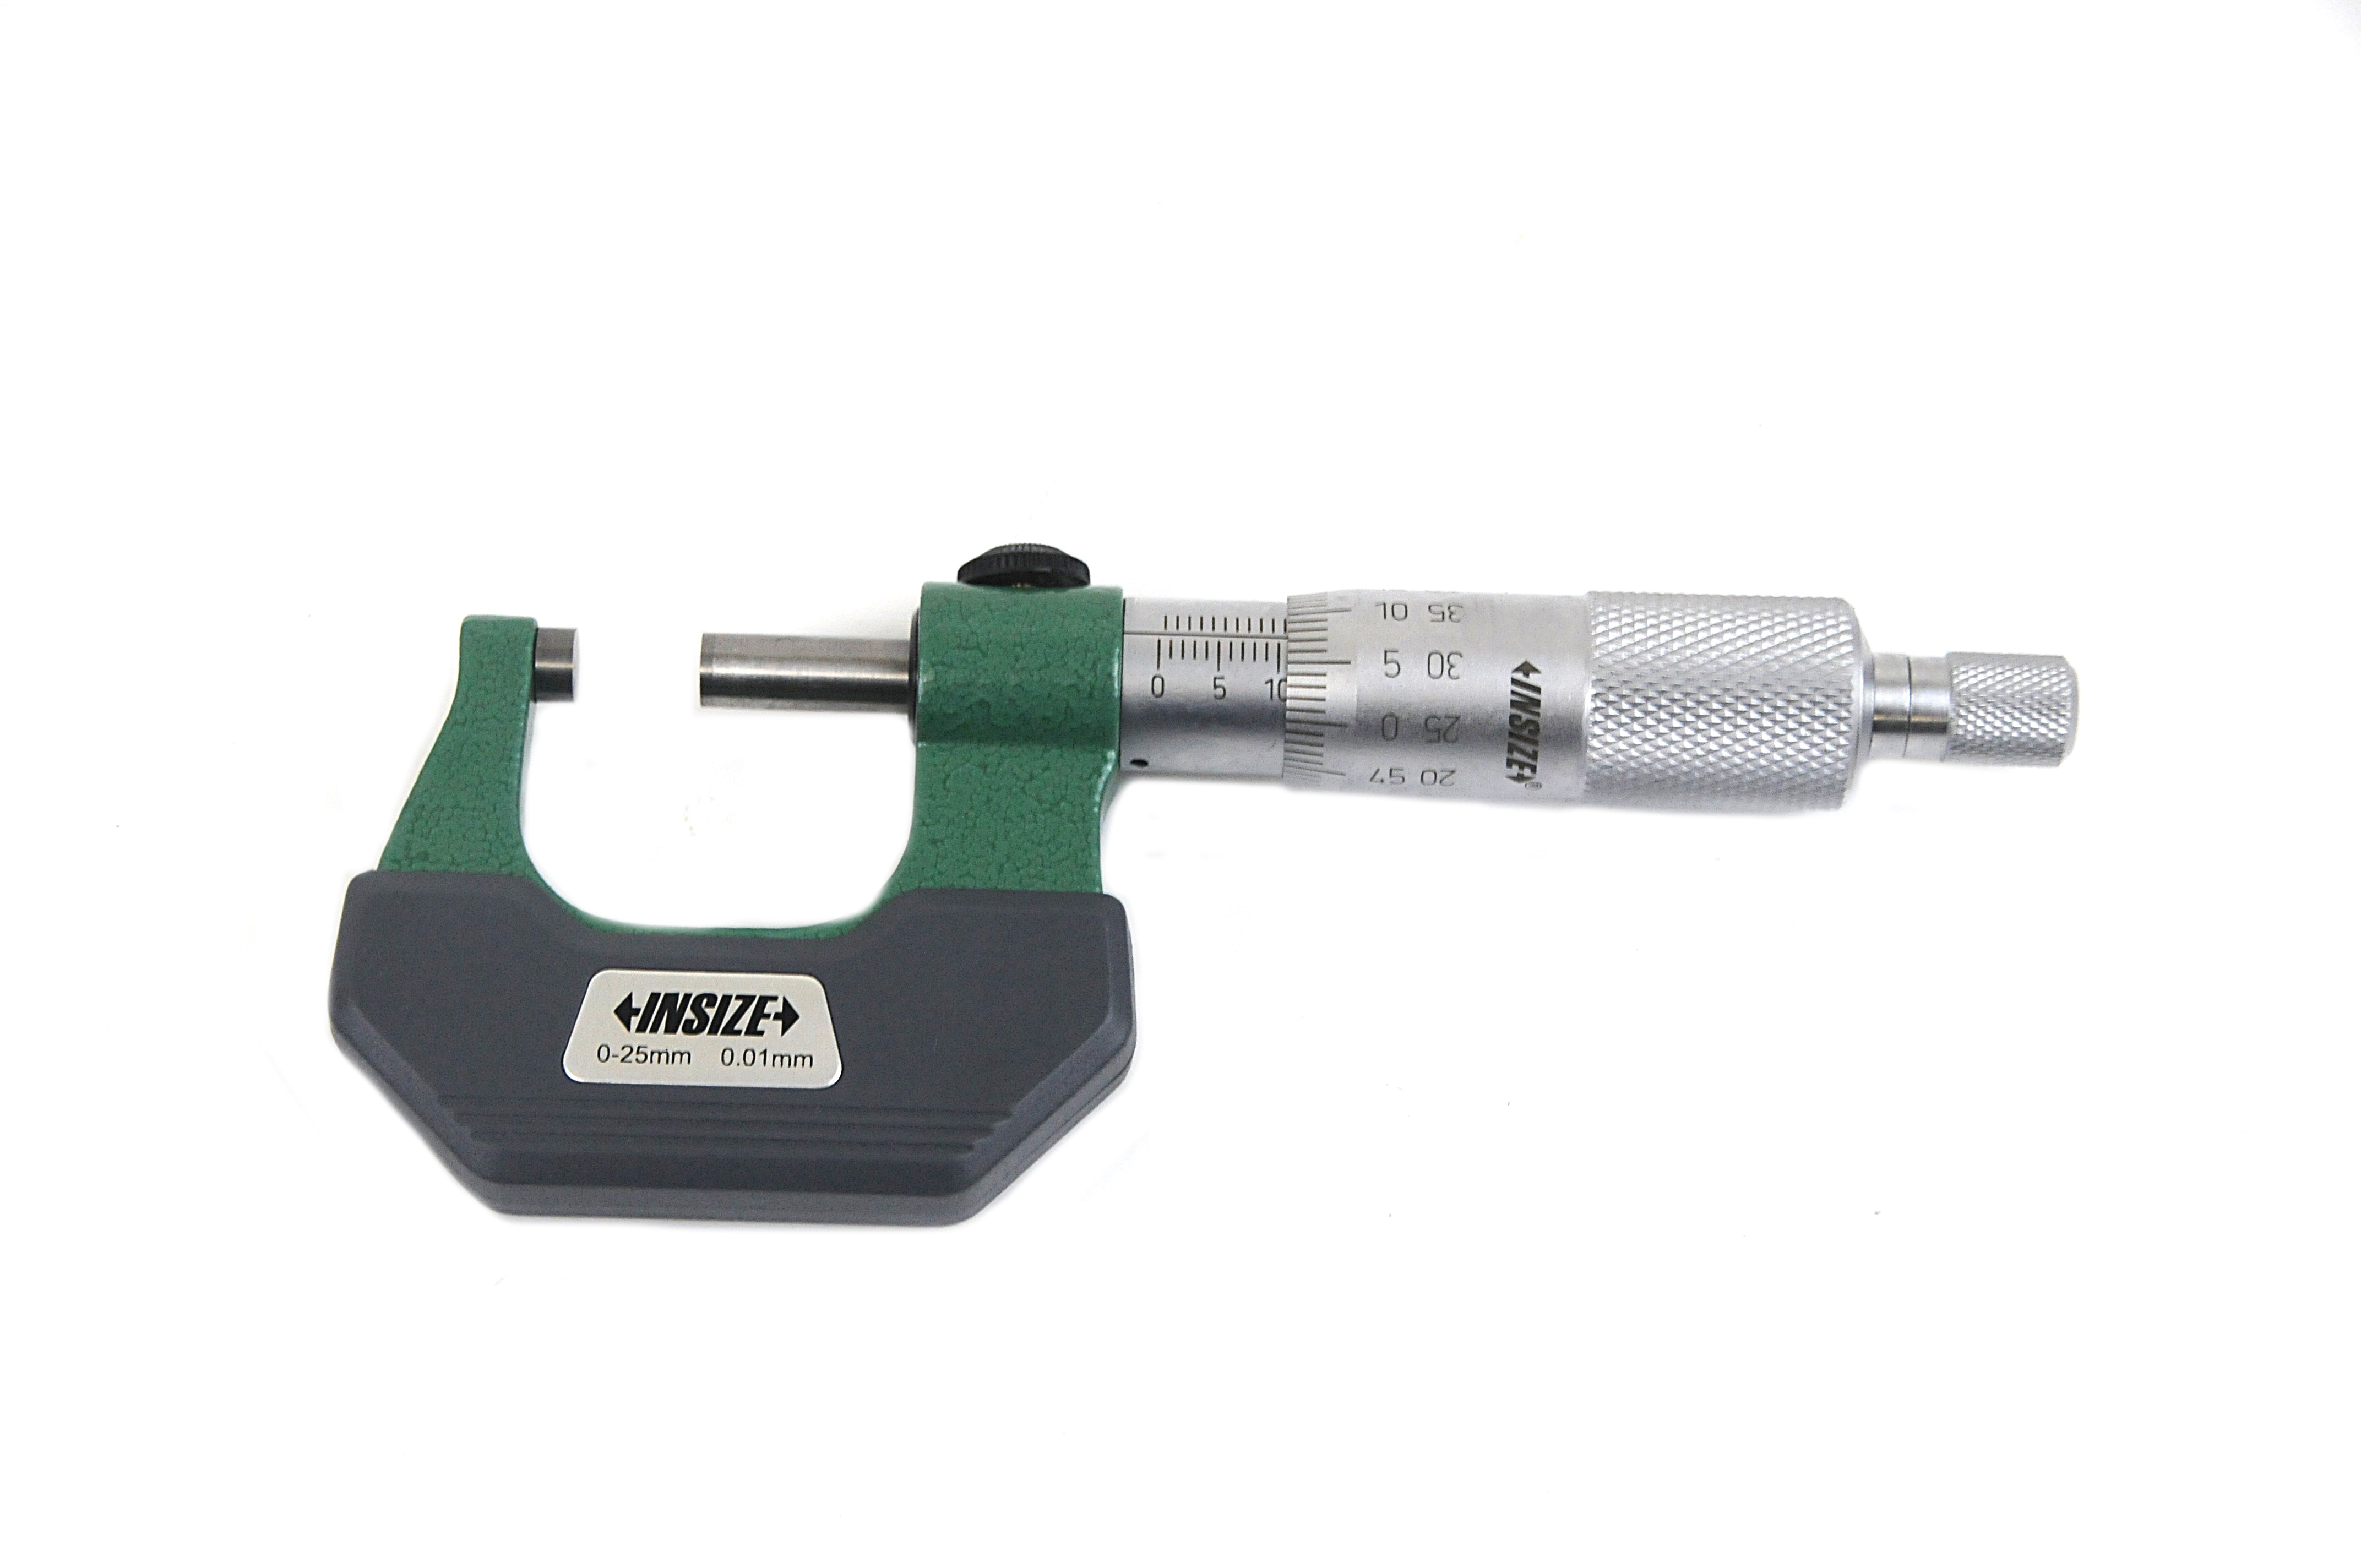 INSIZE 3236-25B Outside Micrometer For Left And Right Hand Graduation 0.01 mm 0 mm-25 mm 